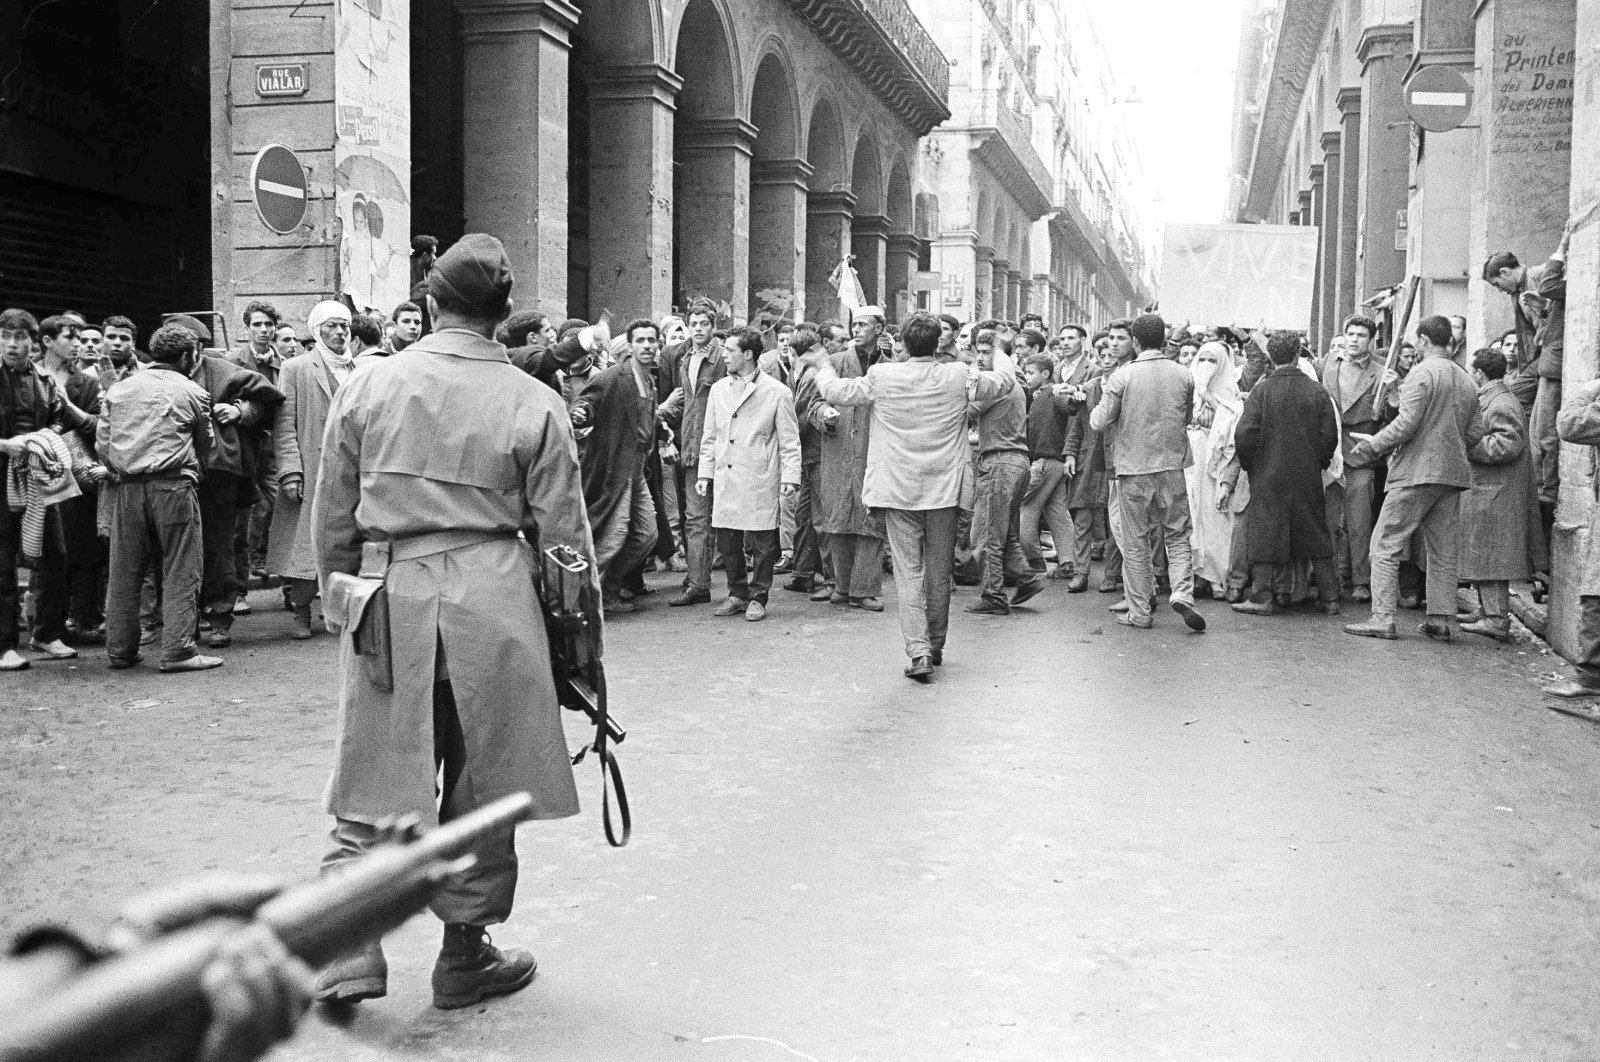 Armed French soldiers (foreground) face a shouting mob of Algerians at an entrance to the Casbah native quarter in Algiers, Dec. 14, 1960. (AP Photo)